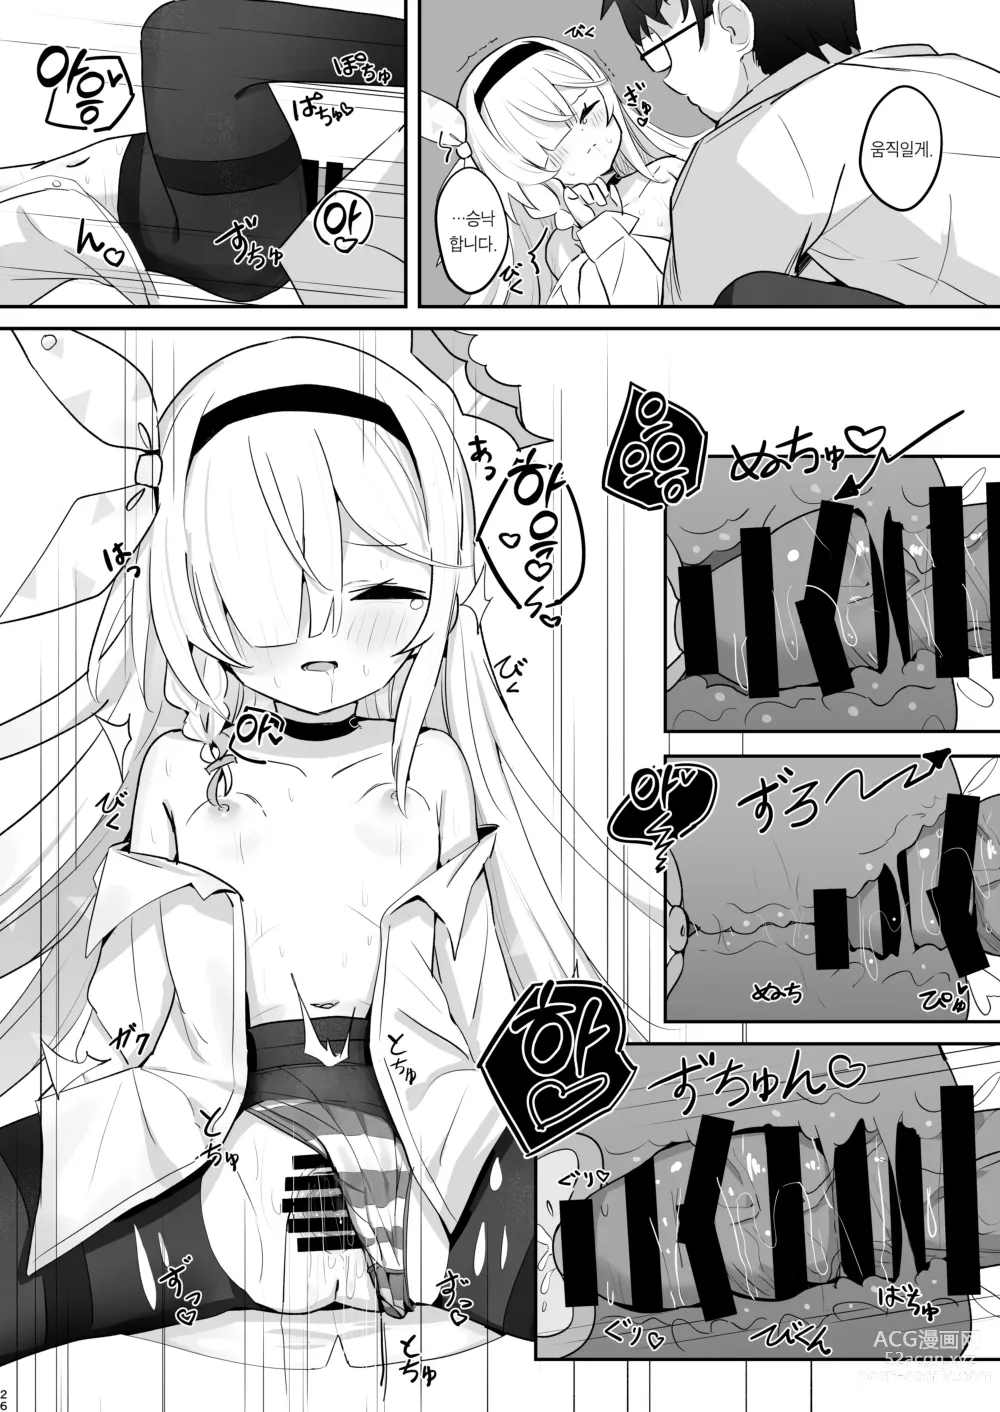 Page 25 of doujinshi 이 따스함을 알아버렸어